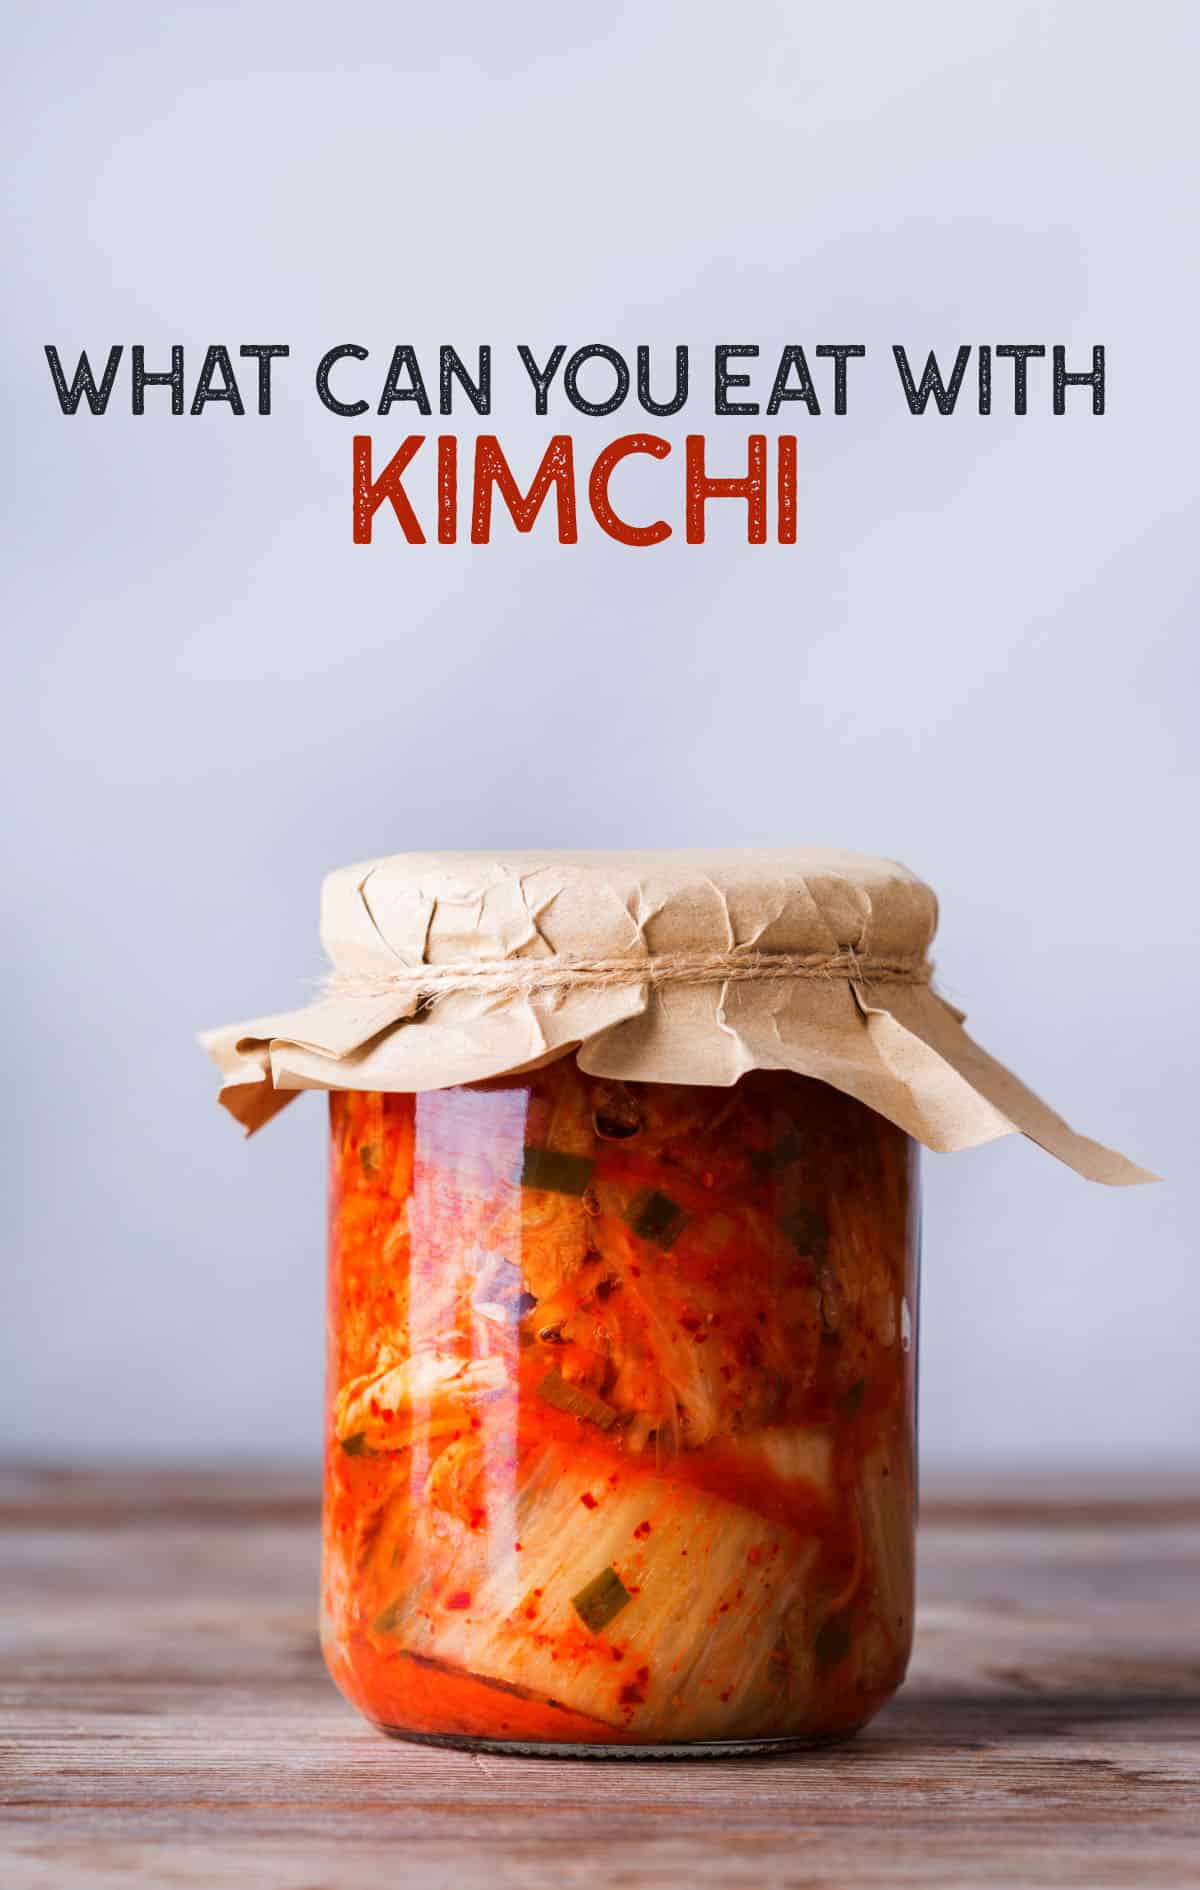 What to eat with Kimchi. Dive into these diverse recipes and meal inspirations that elevate kimchi's bold, zesty flavors.